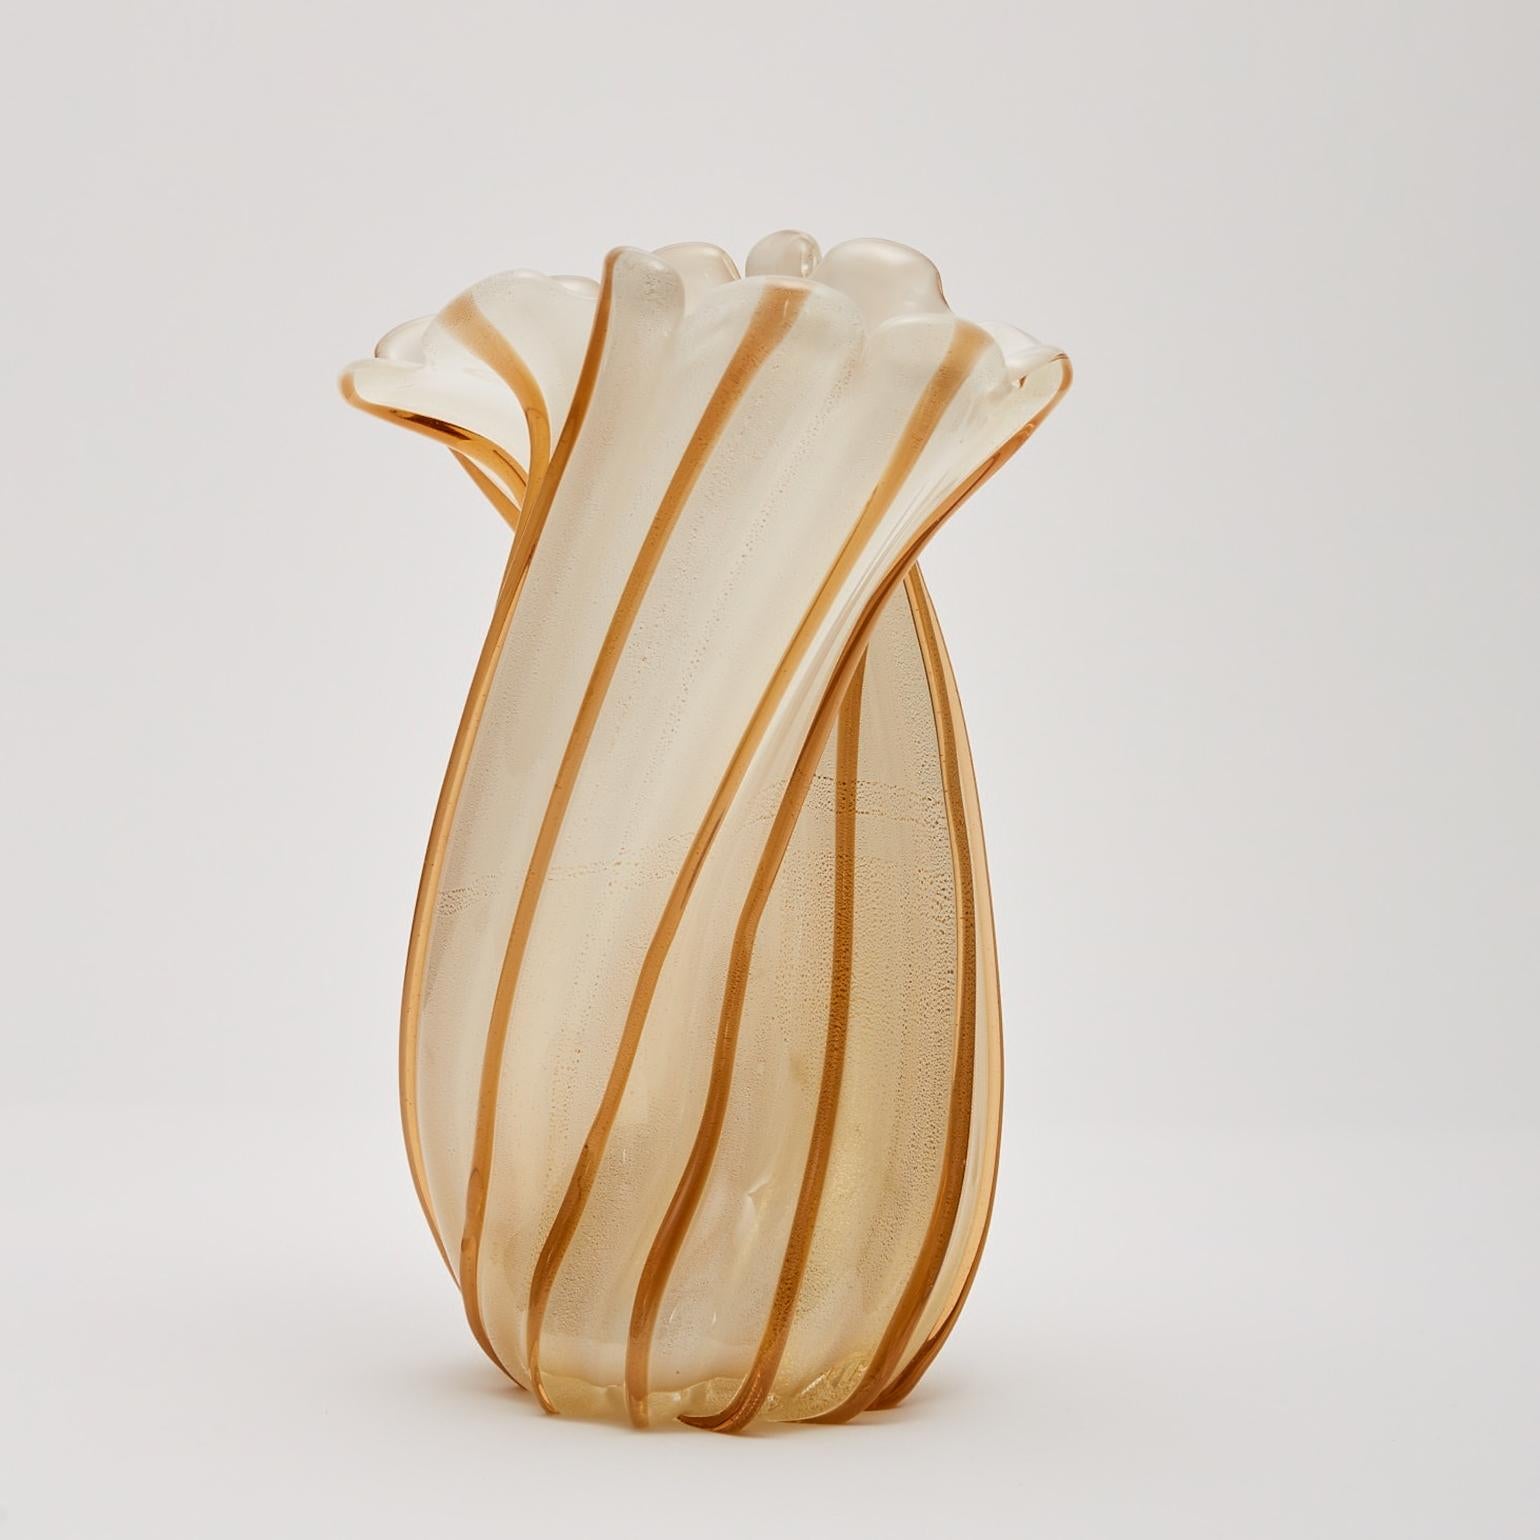 Large Ritorto vase blown glass with gold leaf circa 1955 by Archimede Seguso (1909-1999) for Vetreria Archimede Seguso. Ritorto means twined in Italian. This hand blown glass vase is made up of columns of opalescent and Largetoffee colored twisted